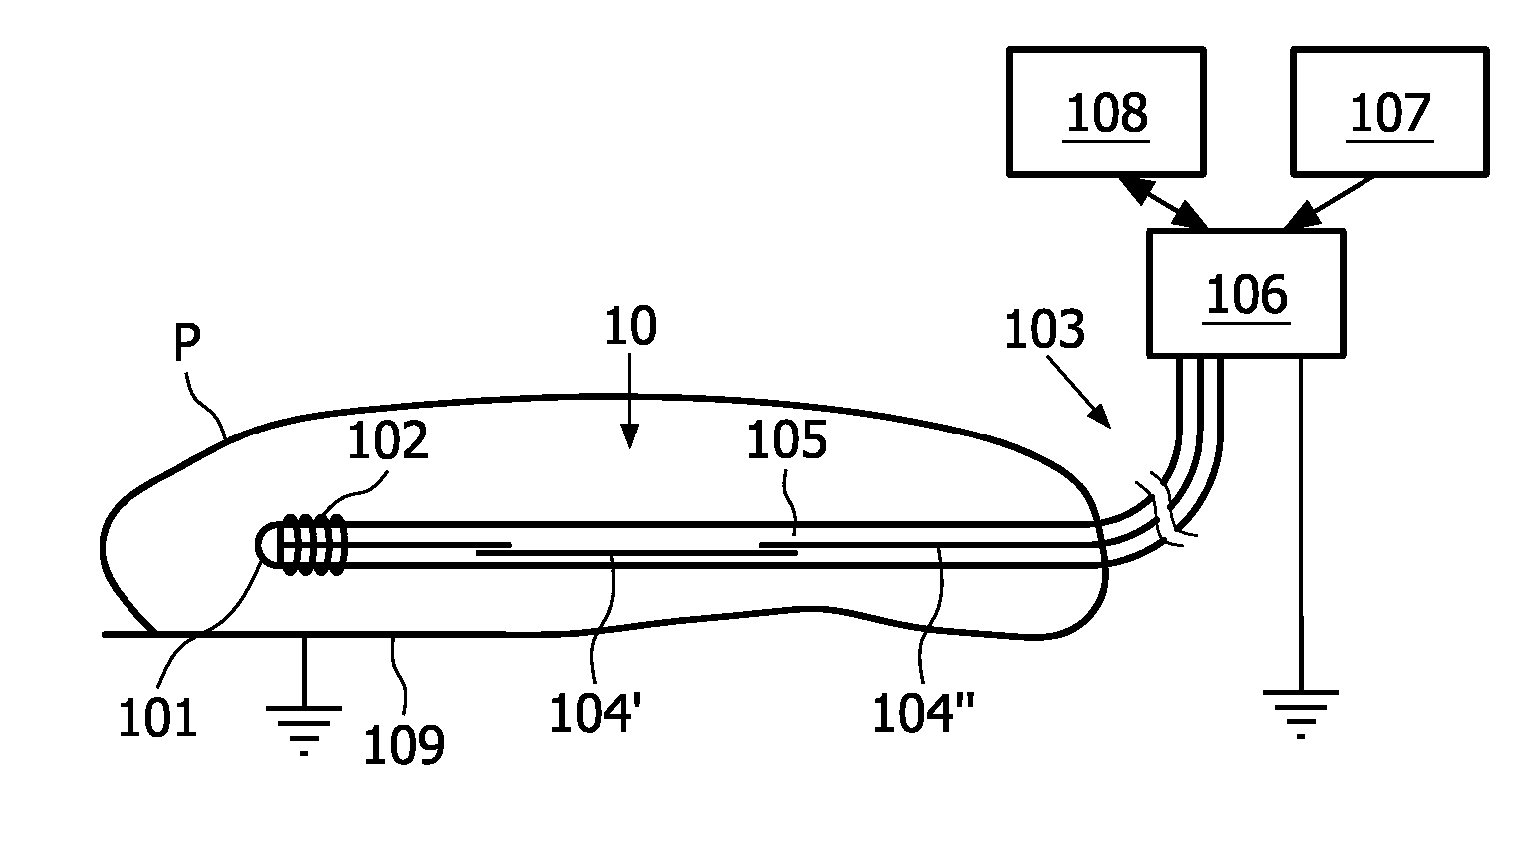 Interventional device for RF ablation for use in RF fields